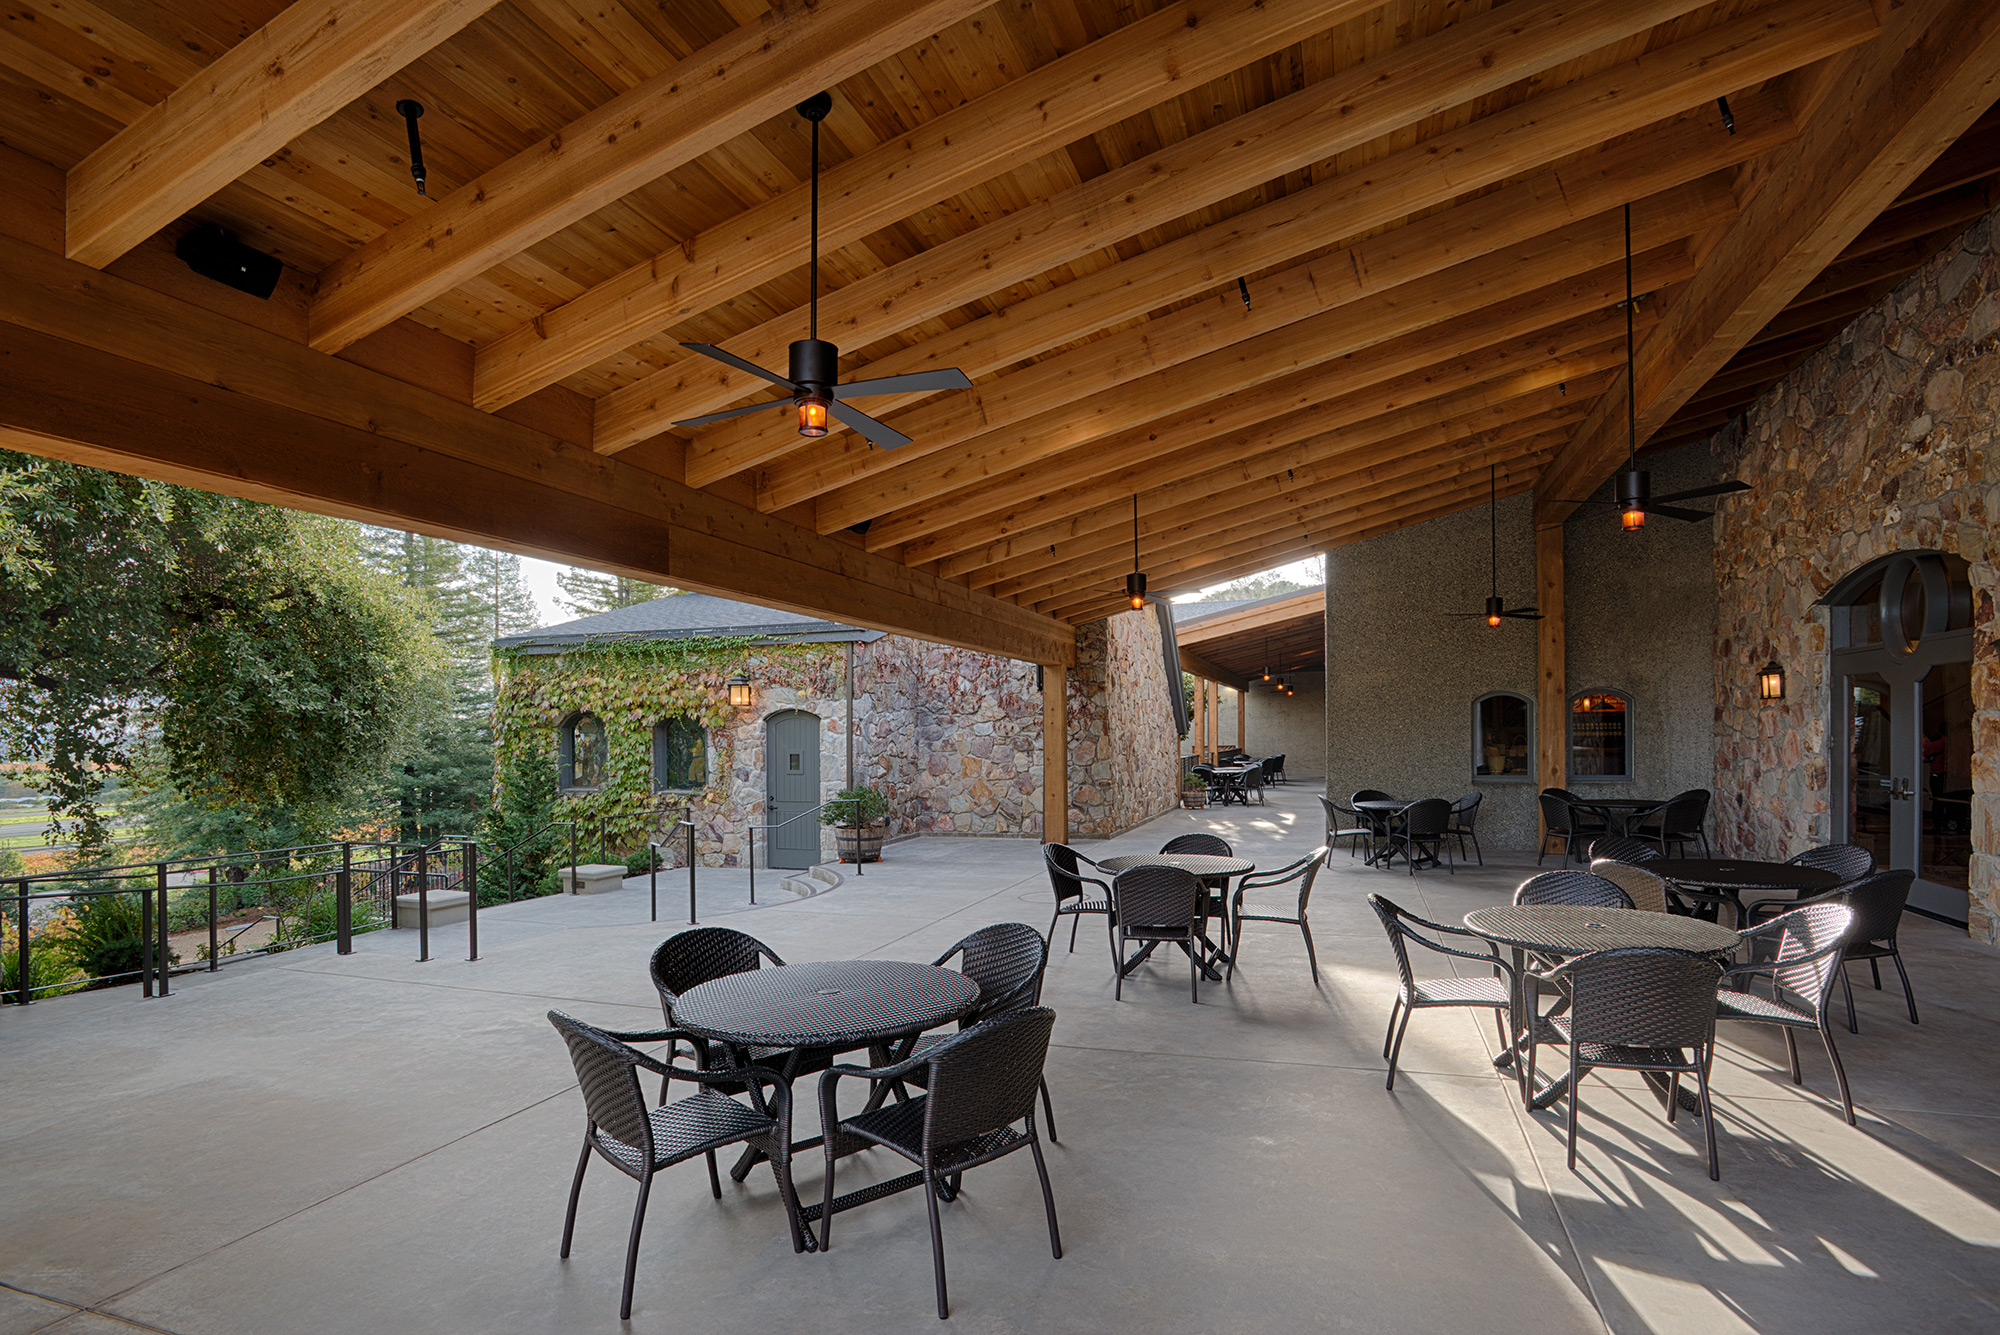 Virginia Dare Winery patio constructed by FDC in Geyserville, CA